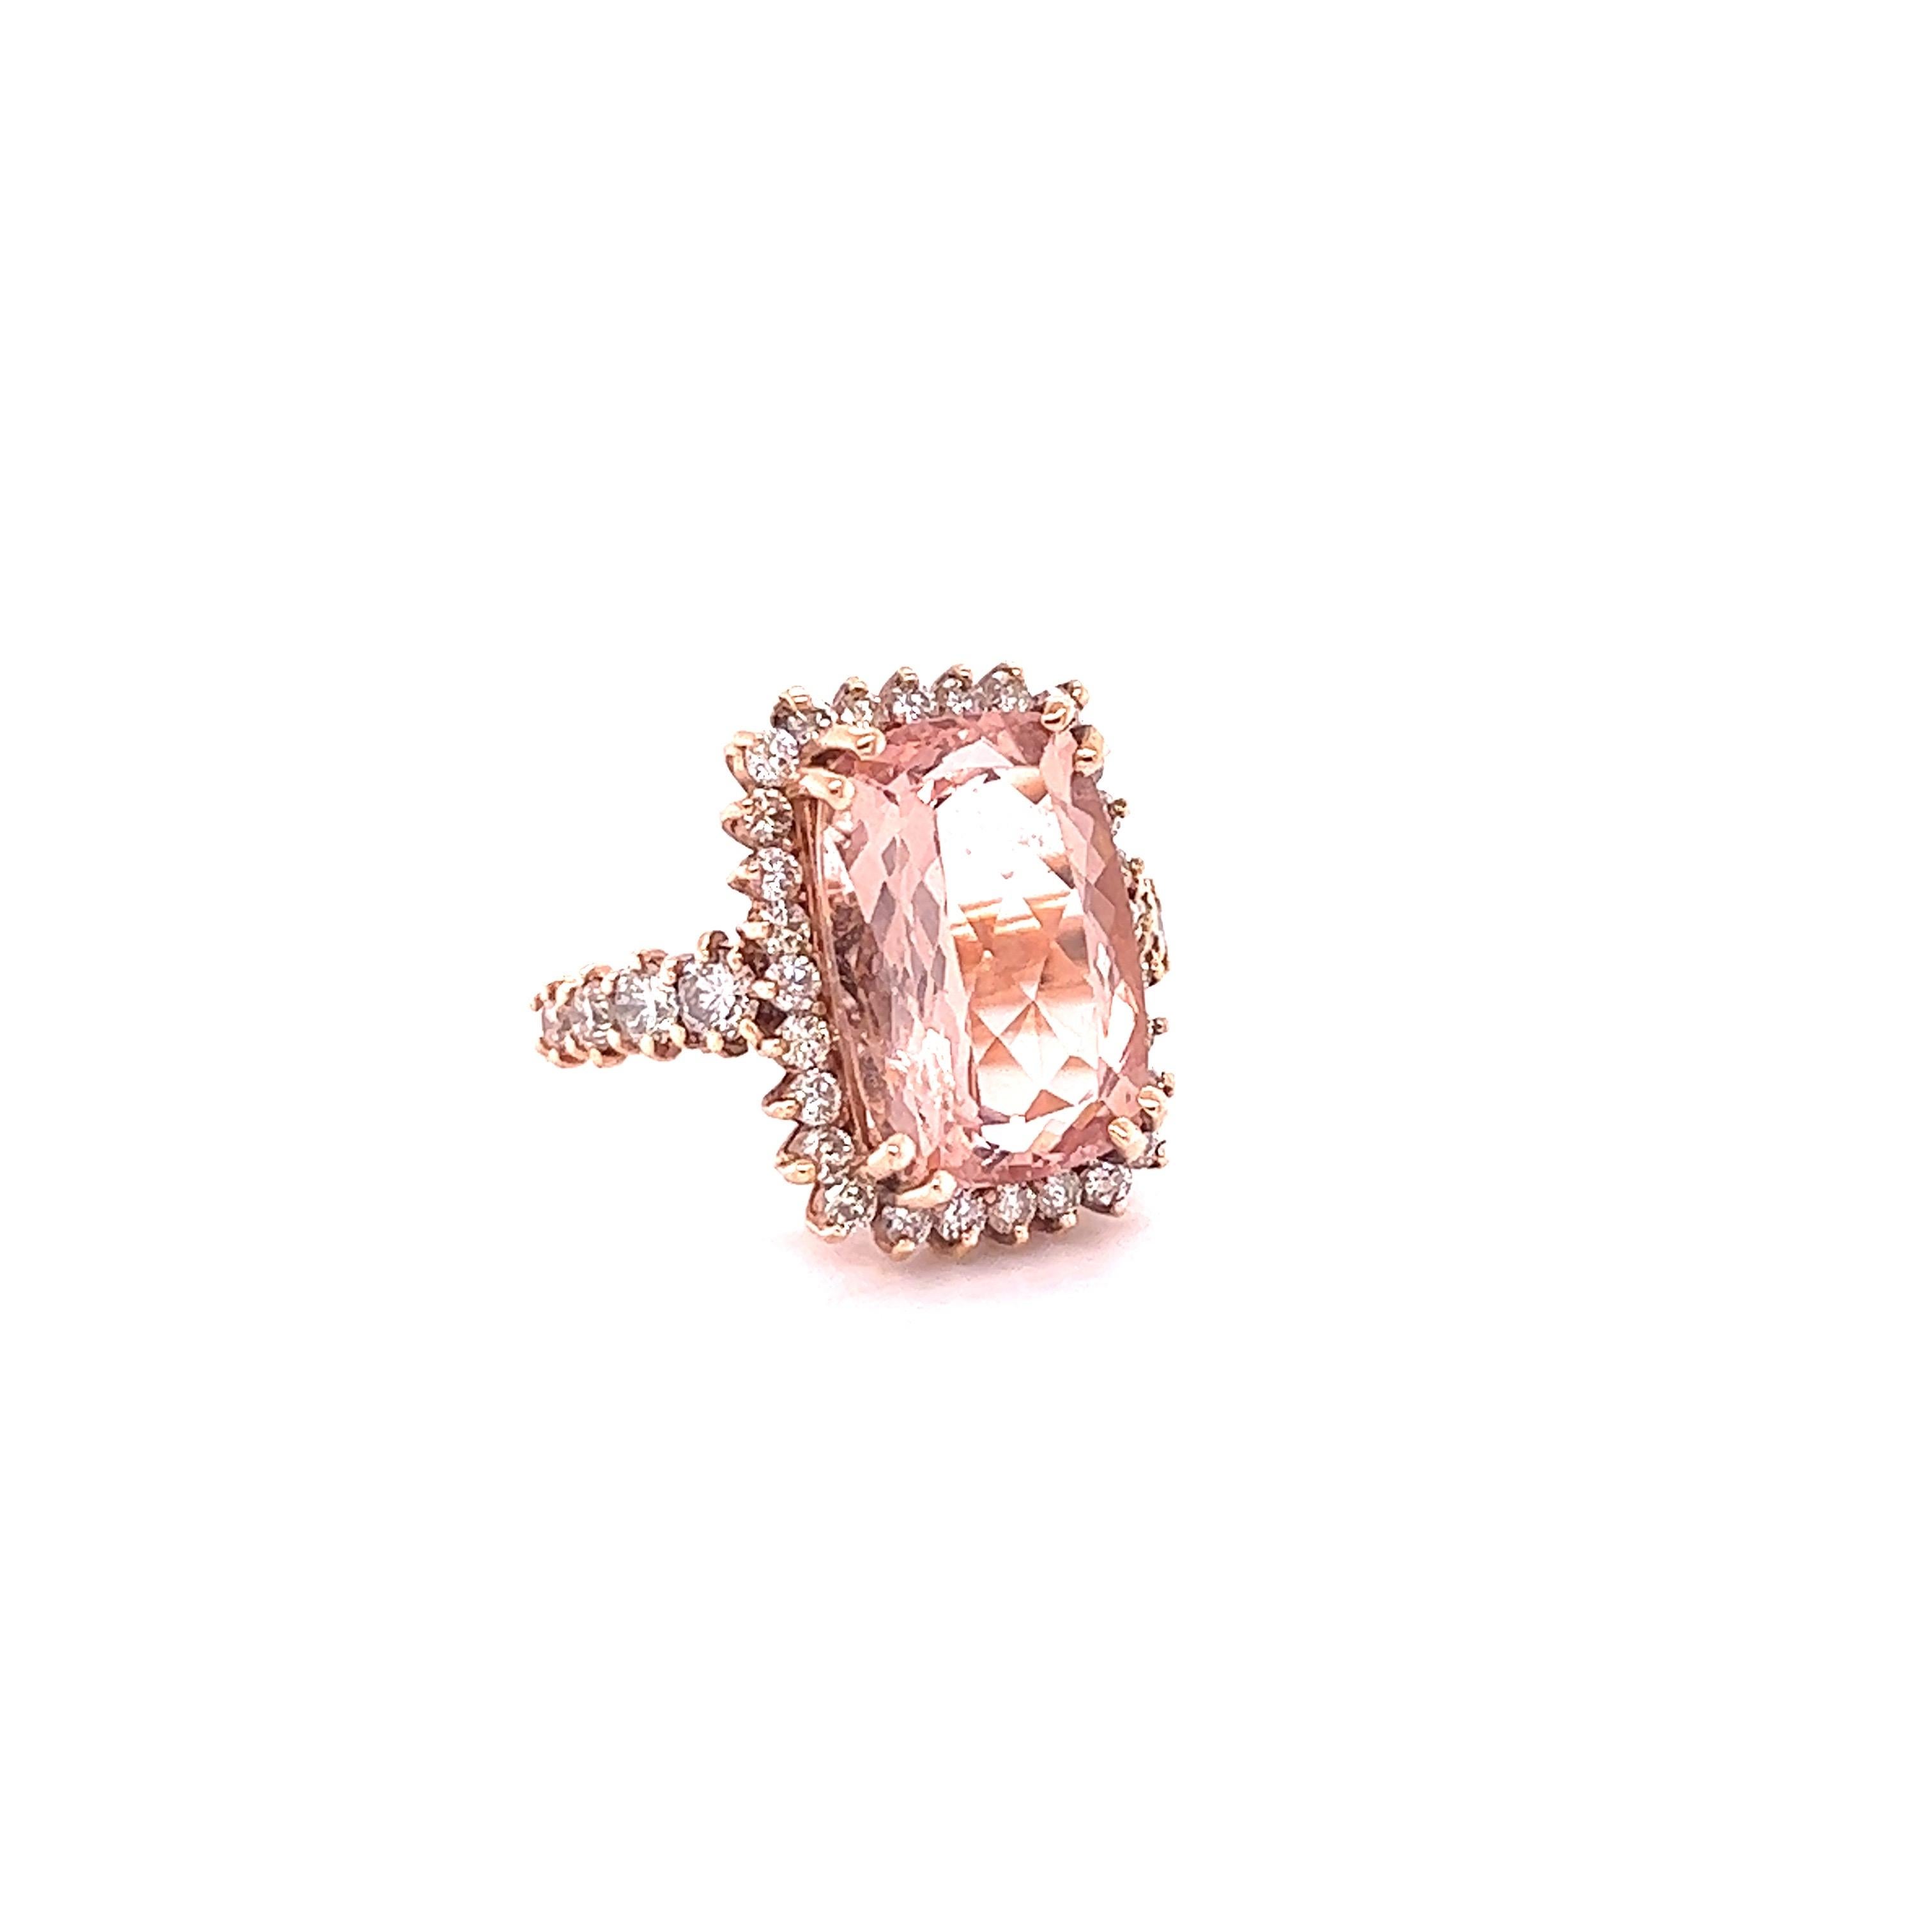 Statement Morganite Diamond Ring! 

This ring has a 9.12 Carat Natural Emerald Cut Morganite that measures at 16 mm x 11 mm and is surrounded by 38 Round Cut Diamonds that weigh 1.74 Carats. The total carat weight of the ring is 10.86 Carats.  

The